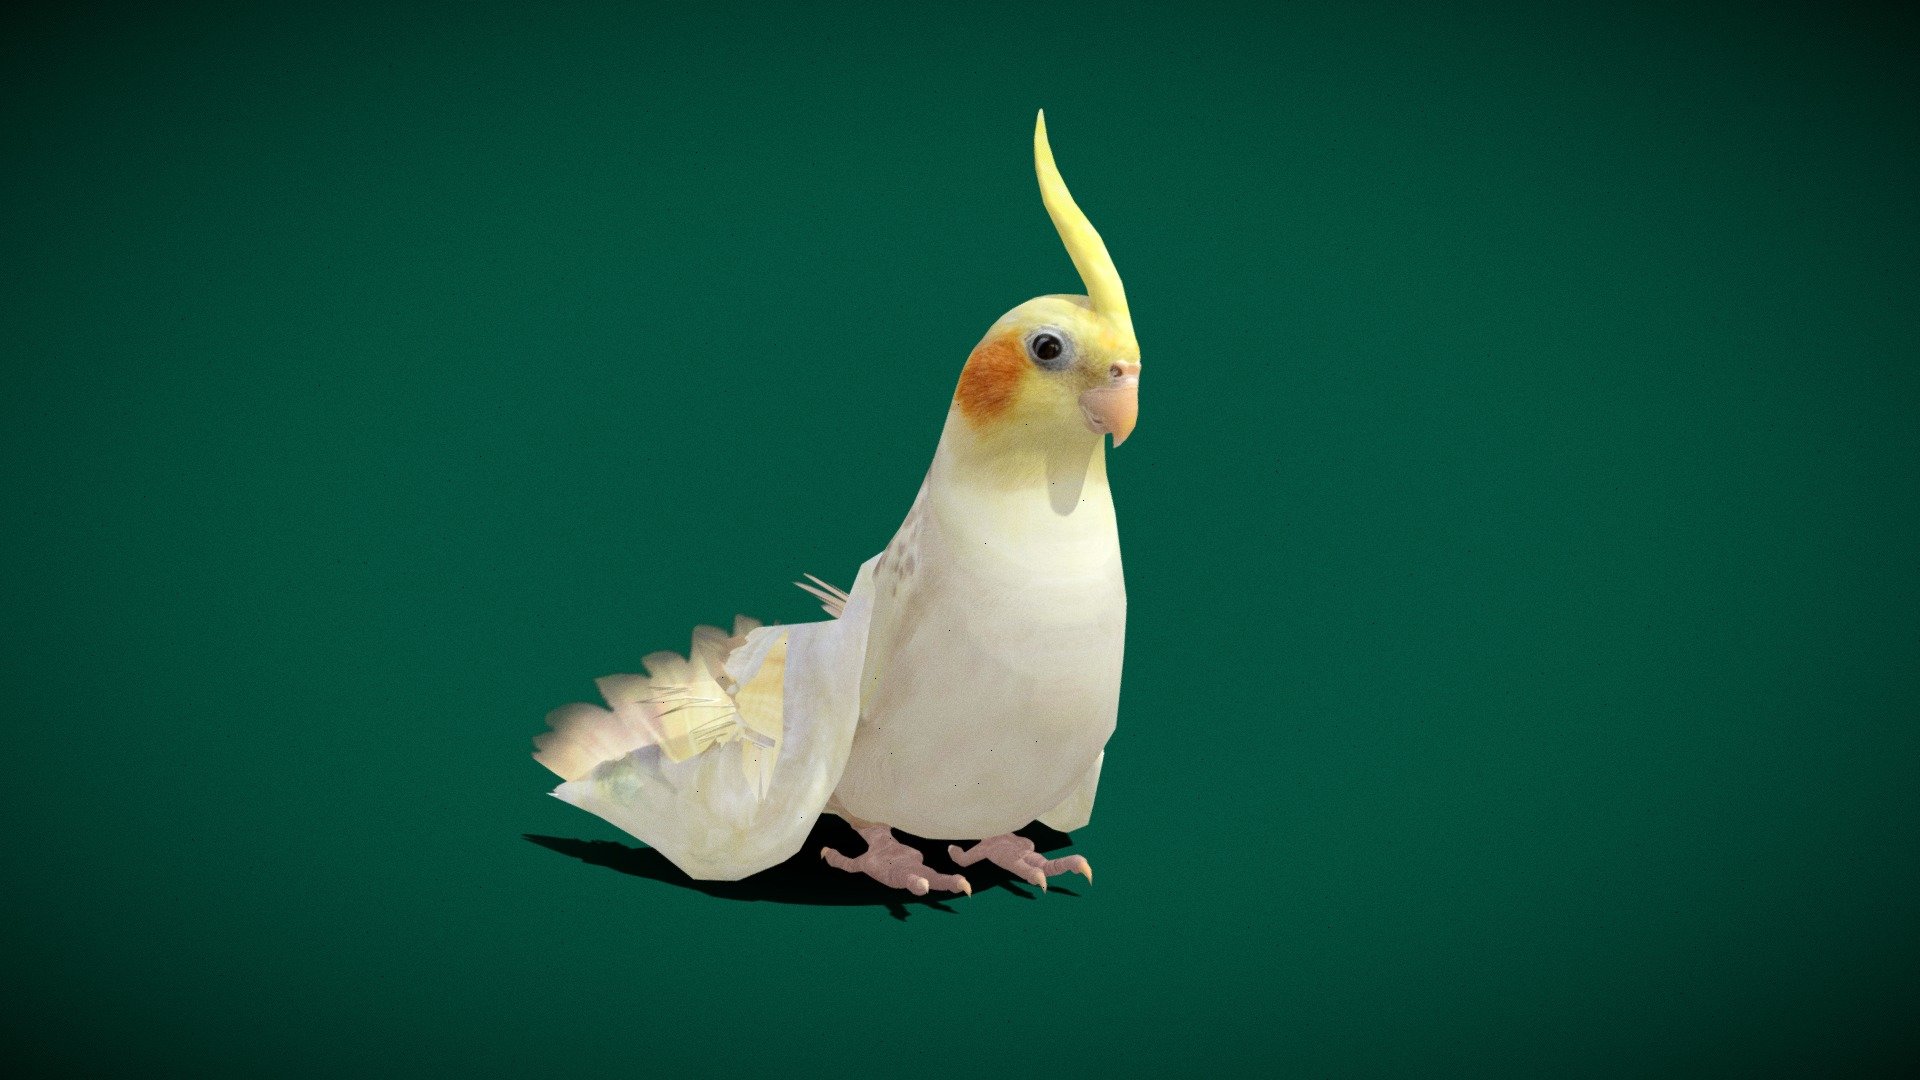 Nymphicus hollandicus

Cockatiel Parrot  Animal Birds (weero/weiro or quarrion)

Idle Animations

Lowpoly

4K PBR Textures Material

Unreal ,Unity FBX File (2018) Compatible 

Blend File 

USDZ File (AR Ready). Real Scale Dimension

Textures Files

GLB File

Gltf File ( Spark AR, Lens Studio , Effector , Spline, Play Canvas ) Compatible

Diffuse , Metallic, Roughness , Normal Map ,AO
ref


The cockatiel, also known as the weero/weiro or quarrion, is a medium-sized parrot that is a member of its own branch of the cockatoo family endemic to Australia. They are prized as household pets and companion parrots throughout the world and are relatively easy to breed. Wikipedia
Lifespan: 10 – 15 years (In the wild)
Mass: 70 – 120 g (Adult)
Domain: Eukaryota
Family: Cacatuidae
Kingdom: Animalia
Order: Psittaciformes - Cockatiel Parrot (Lowpoly) - Buy Royalty Free 3D model by Nyilonelycompany 3d model